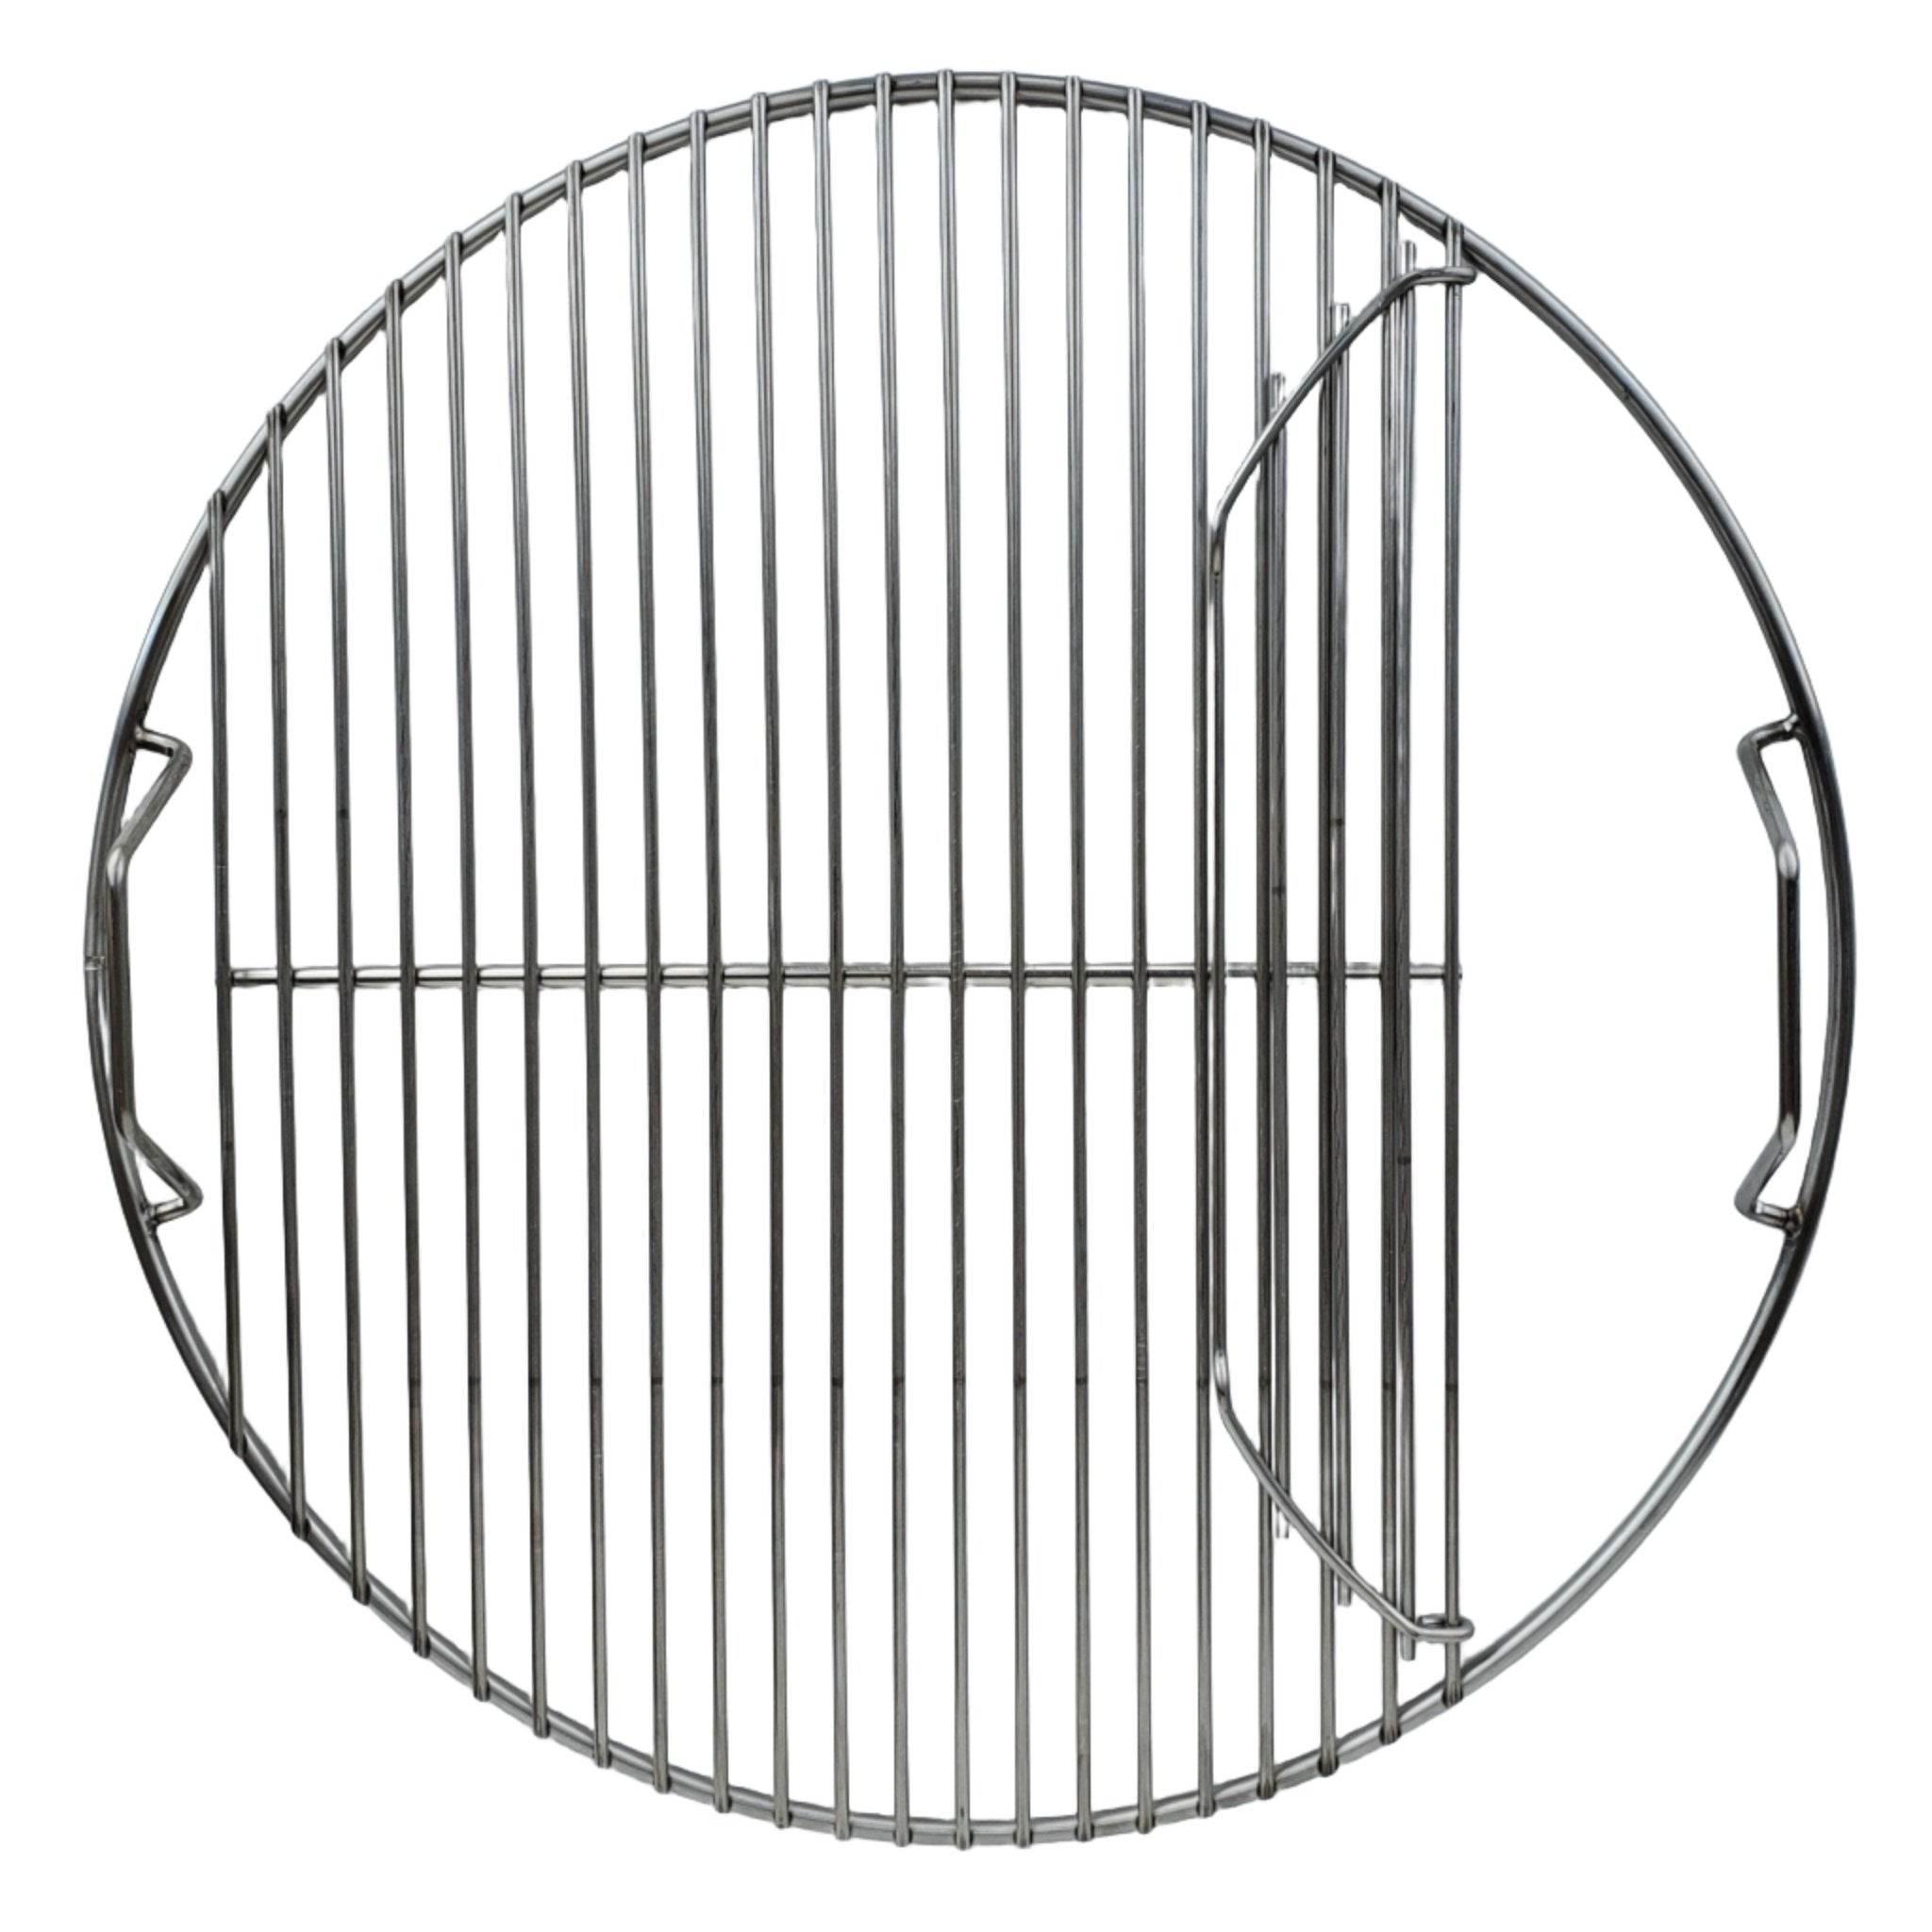 Heavy Duty Stainless Food Grate For 22" Kettles (with flip up door) - Hunsaker Vortex Smokers